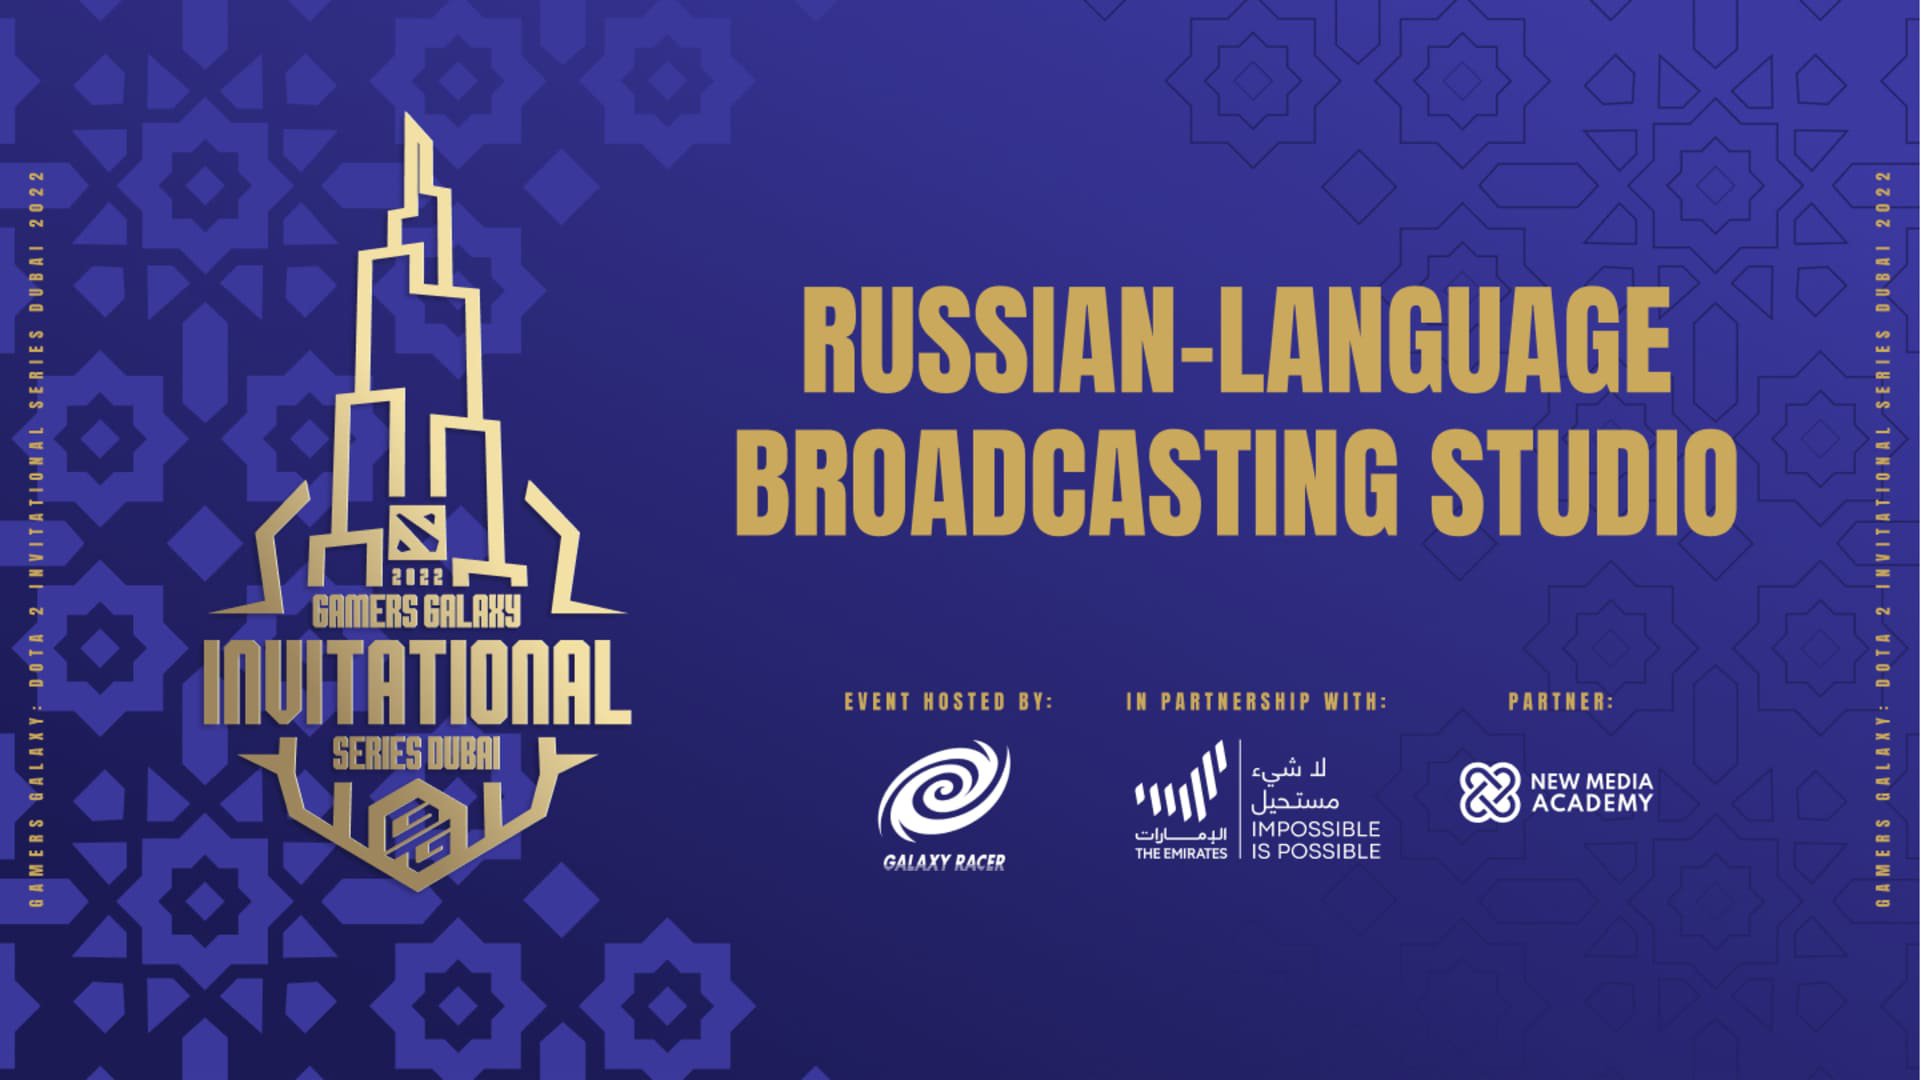 WePlay Esports has been appointed as the Russian-language broadcasting studio for GAMERS GALAXY: Dota 2 Invitational Series Dubai 2022. Visual: WePlay Holding